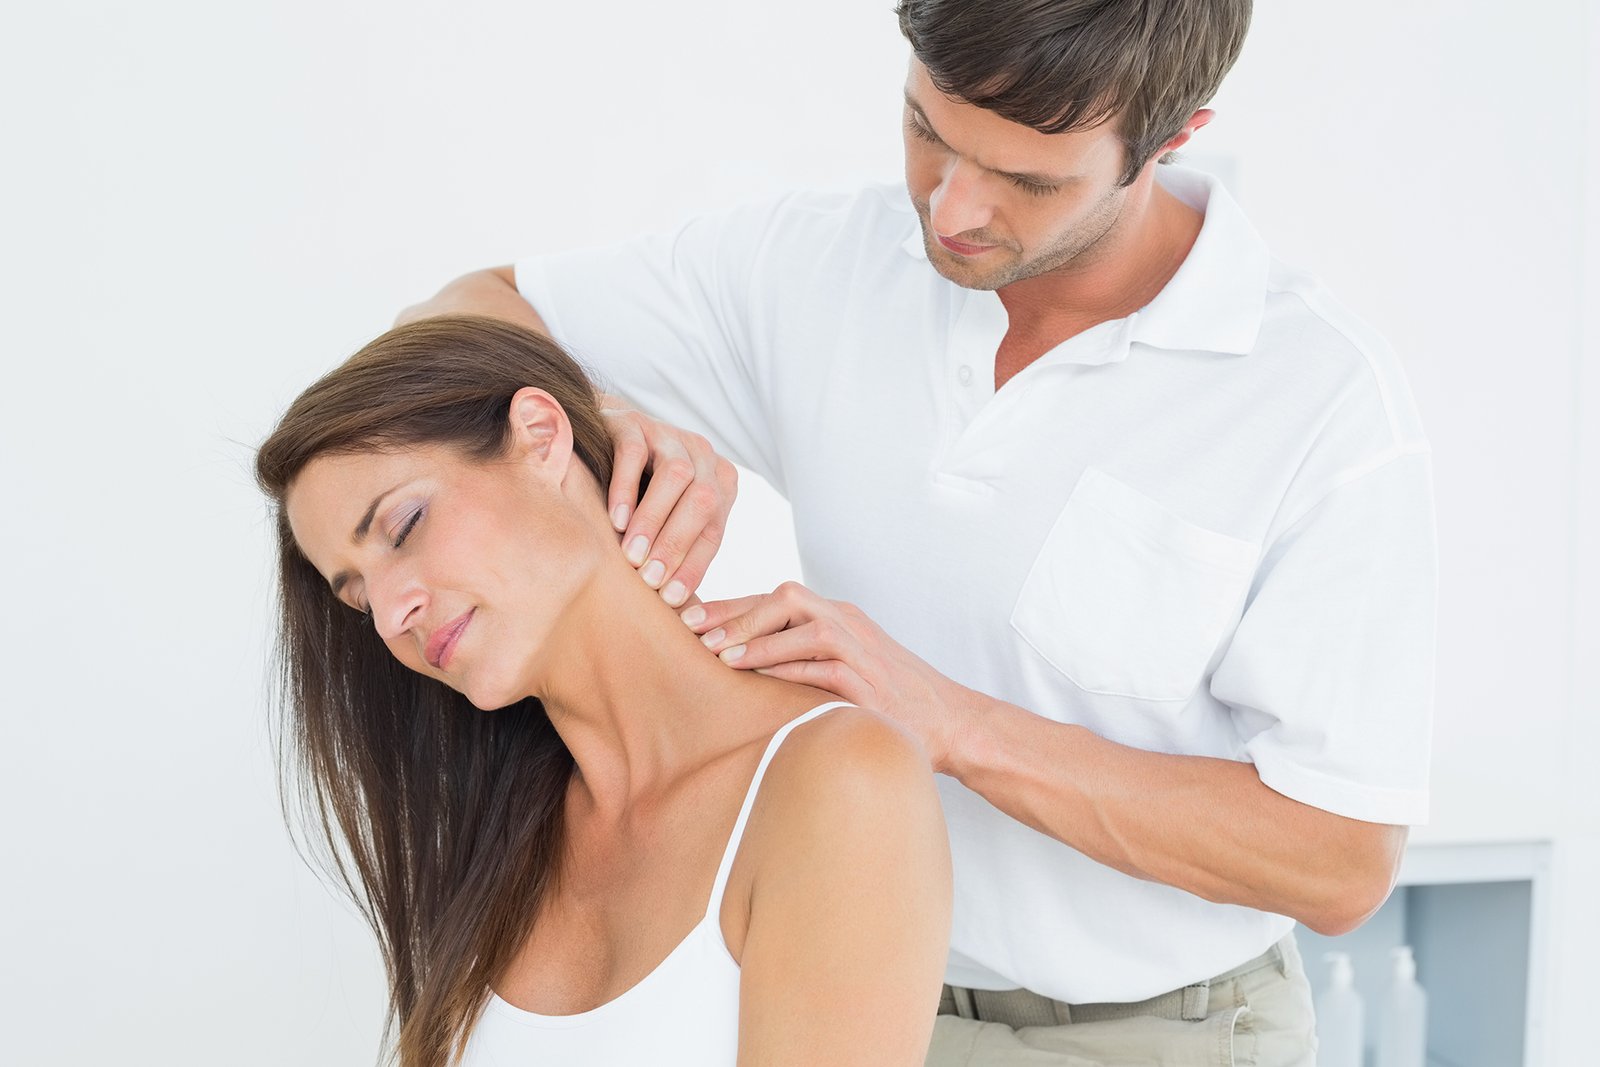 How Chiropractors Can Help Achieve Wellness For Your Body And Mind